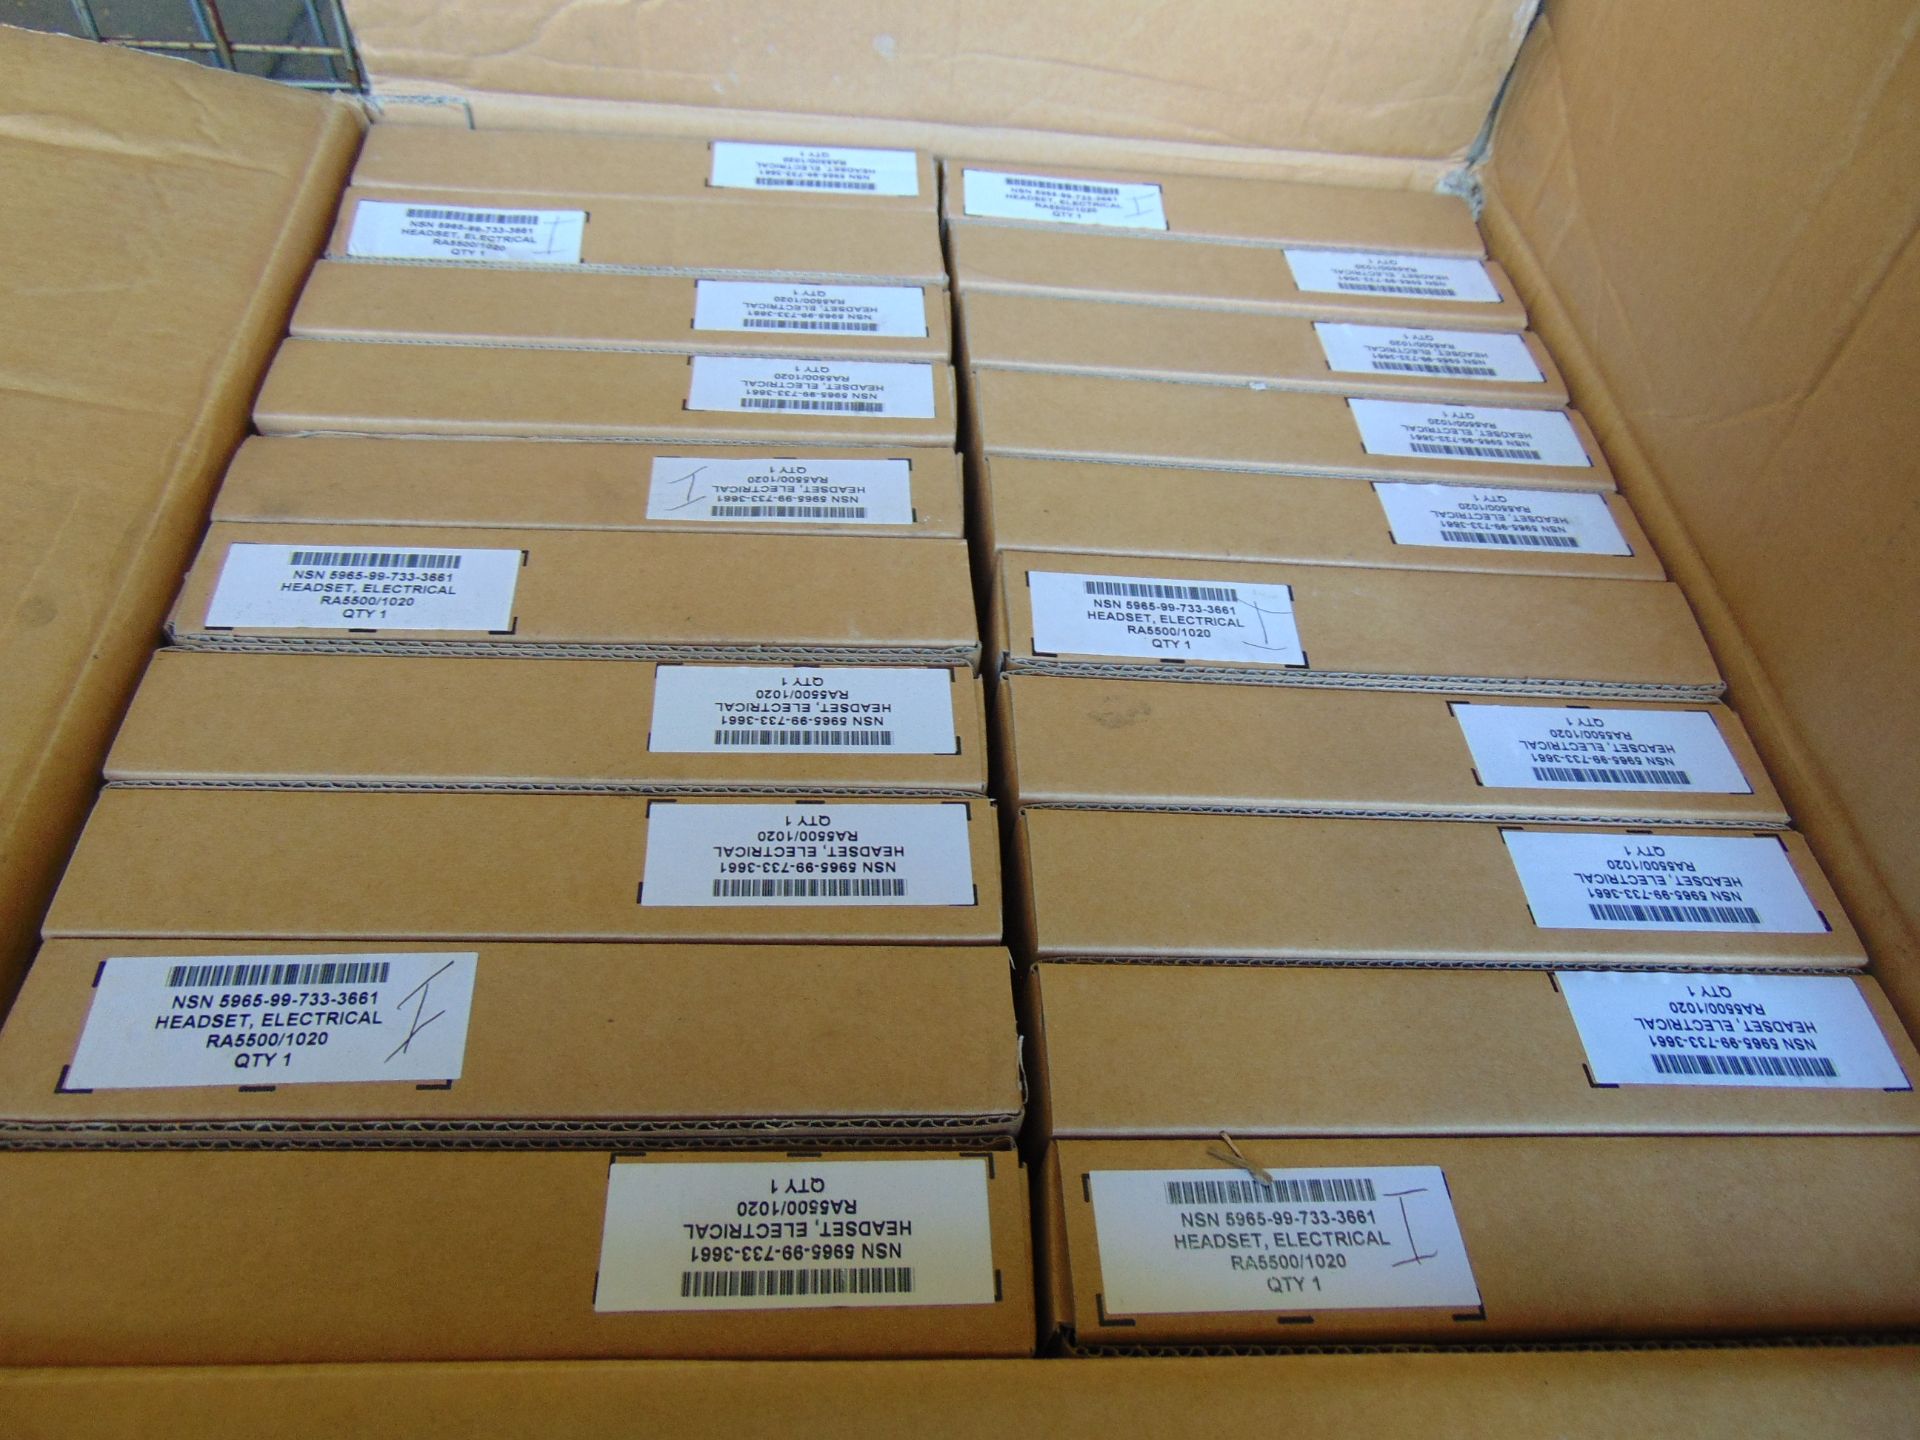 80 x New Unissued Frontier 1000 Clansman / Bowman Headset, (4 Boxes x 20), Original Packing - Image 5 of 7